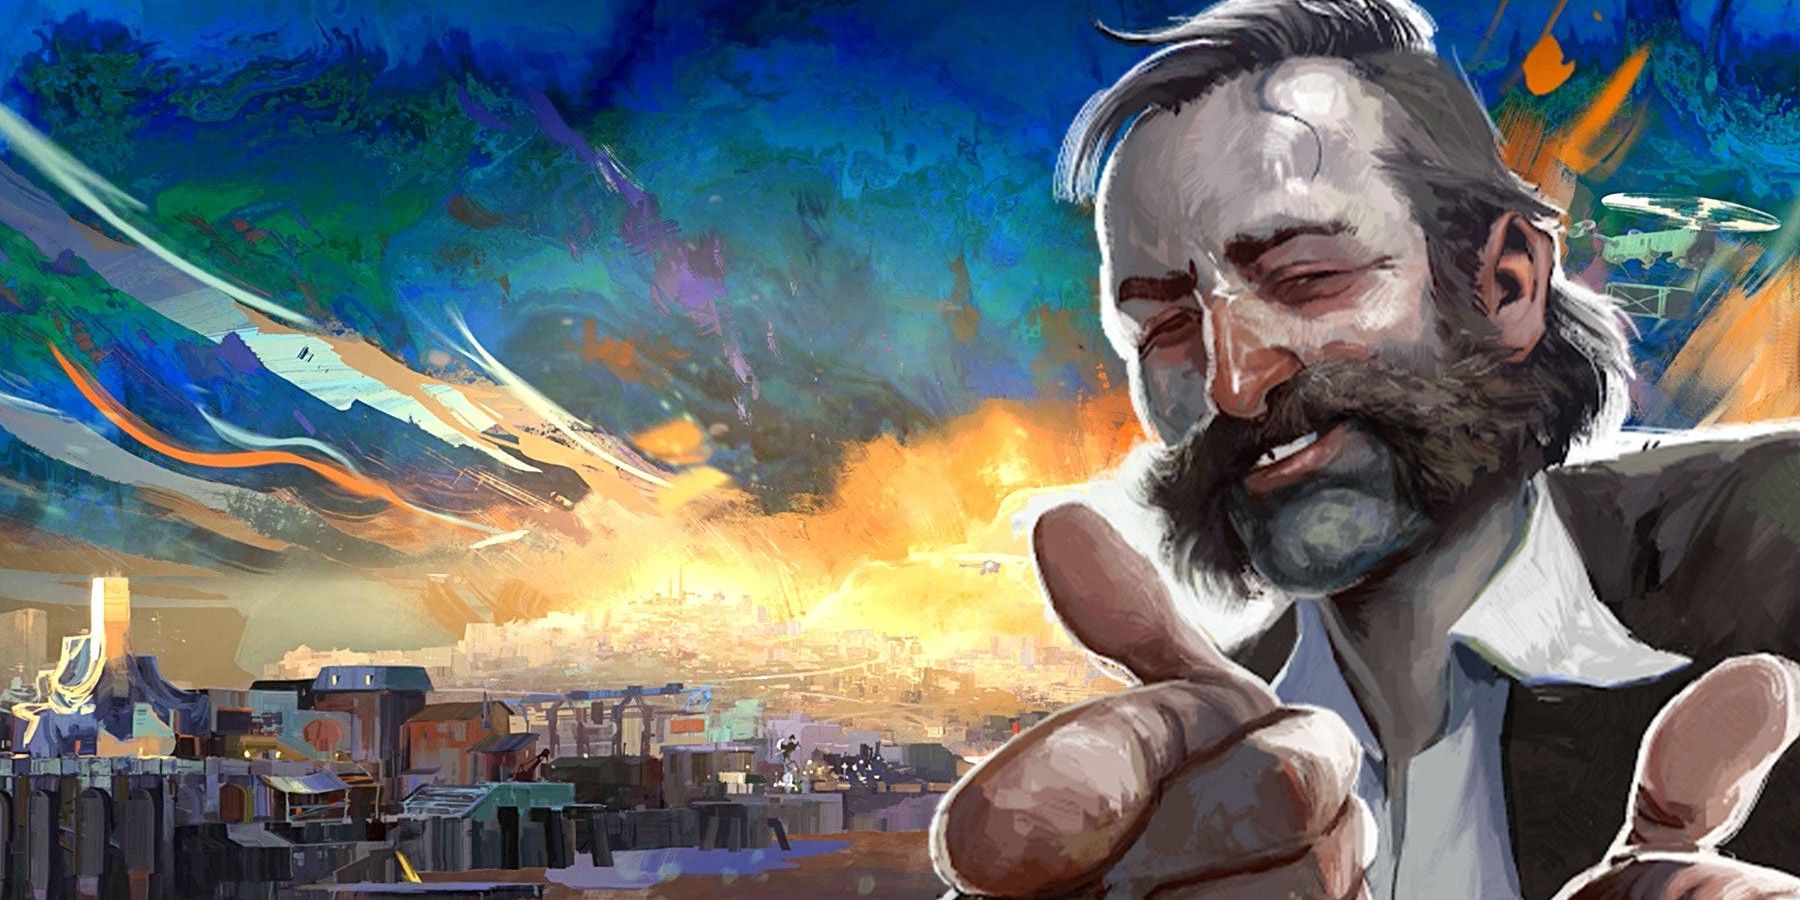 Protagonist of Disco Elysium winking and throwing finger guns towards the camera